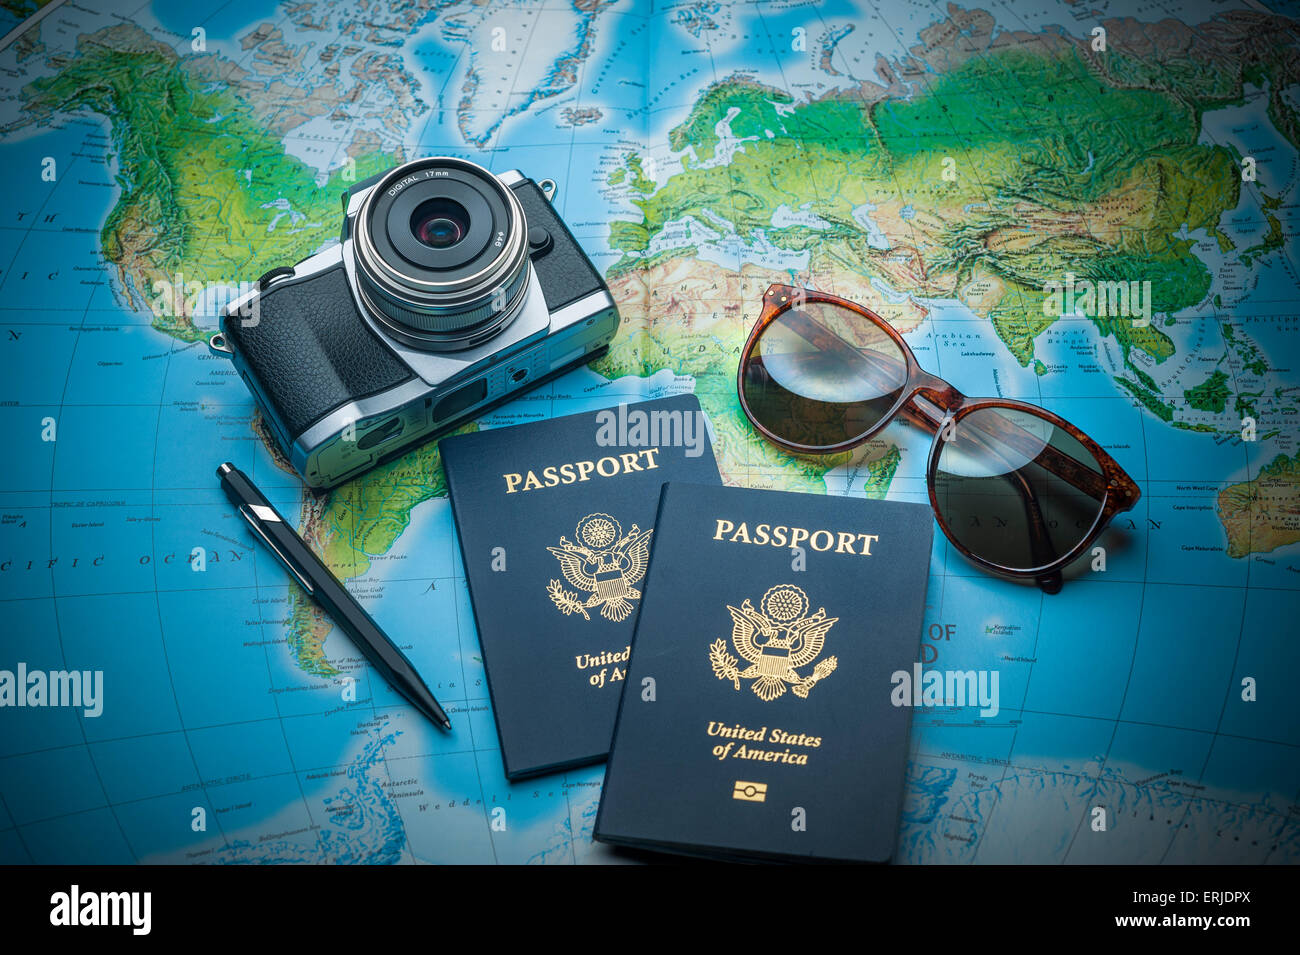 Passports for world travel, camera and glasses on a map of the world Stock Photo